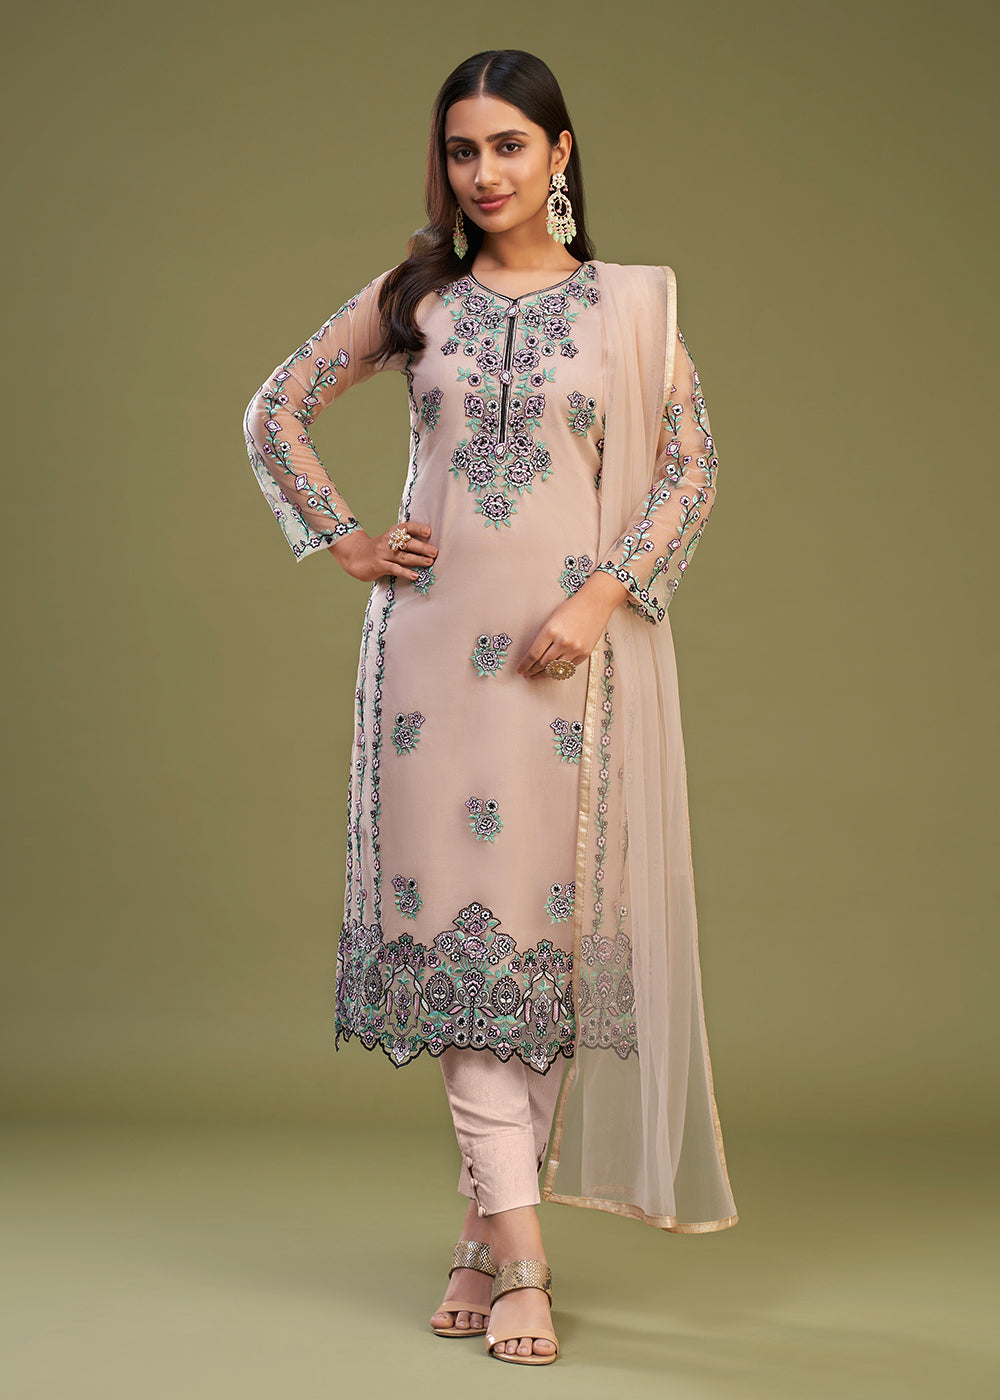 Buy Now Peach Multi Thread Embroidered Net Salwar Suit Online in USA, UK, Canada, Germany, Australia & Worldwide at Empress Clothing.